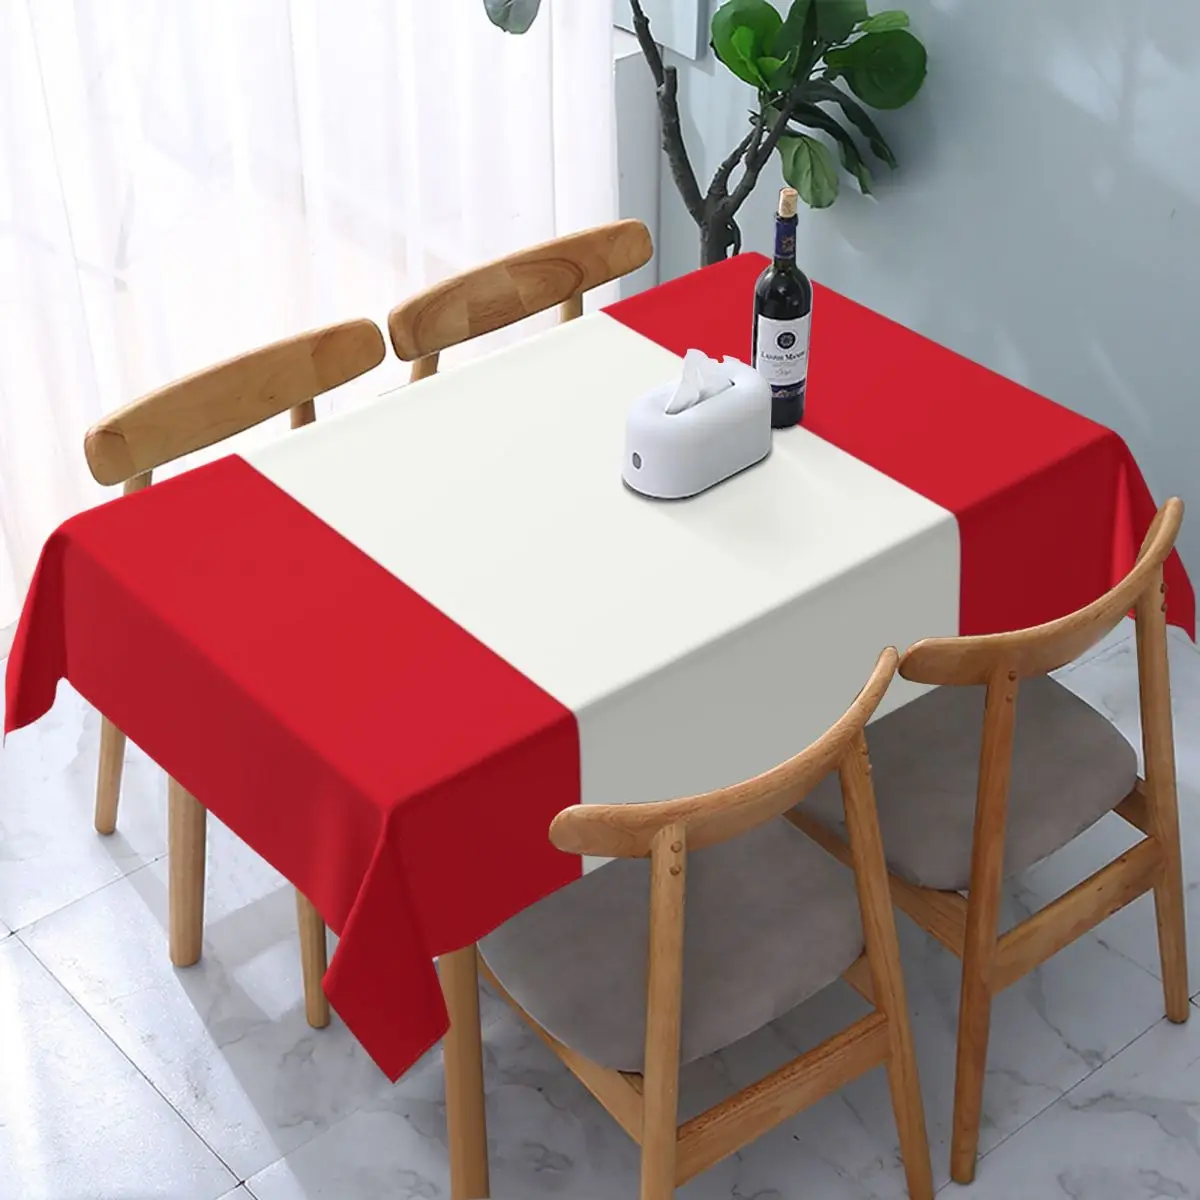 

Rectangular Flag Of Peru Table Cloth Oilproof Tablecloth 40"-44" Table Cover Backed with Elastic Edge